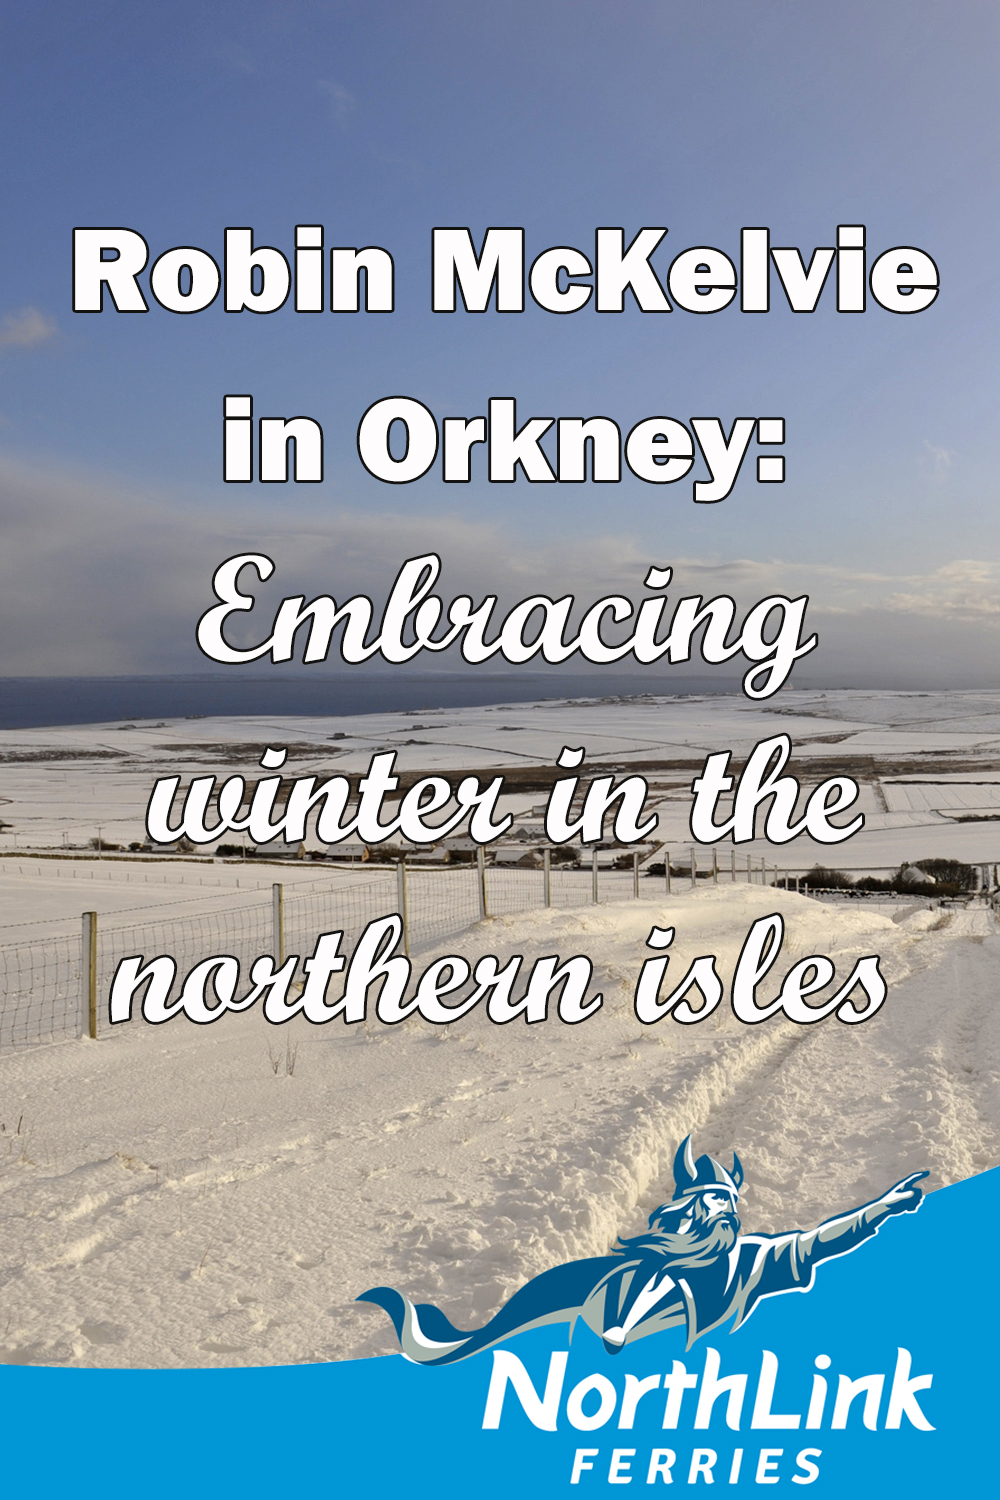 Robin McKelvie in Orkney: Embracing winter in the northern isles